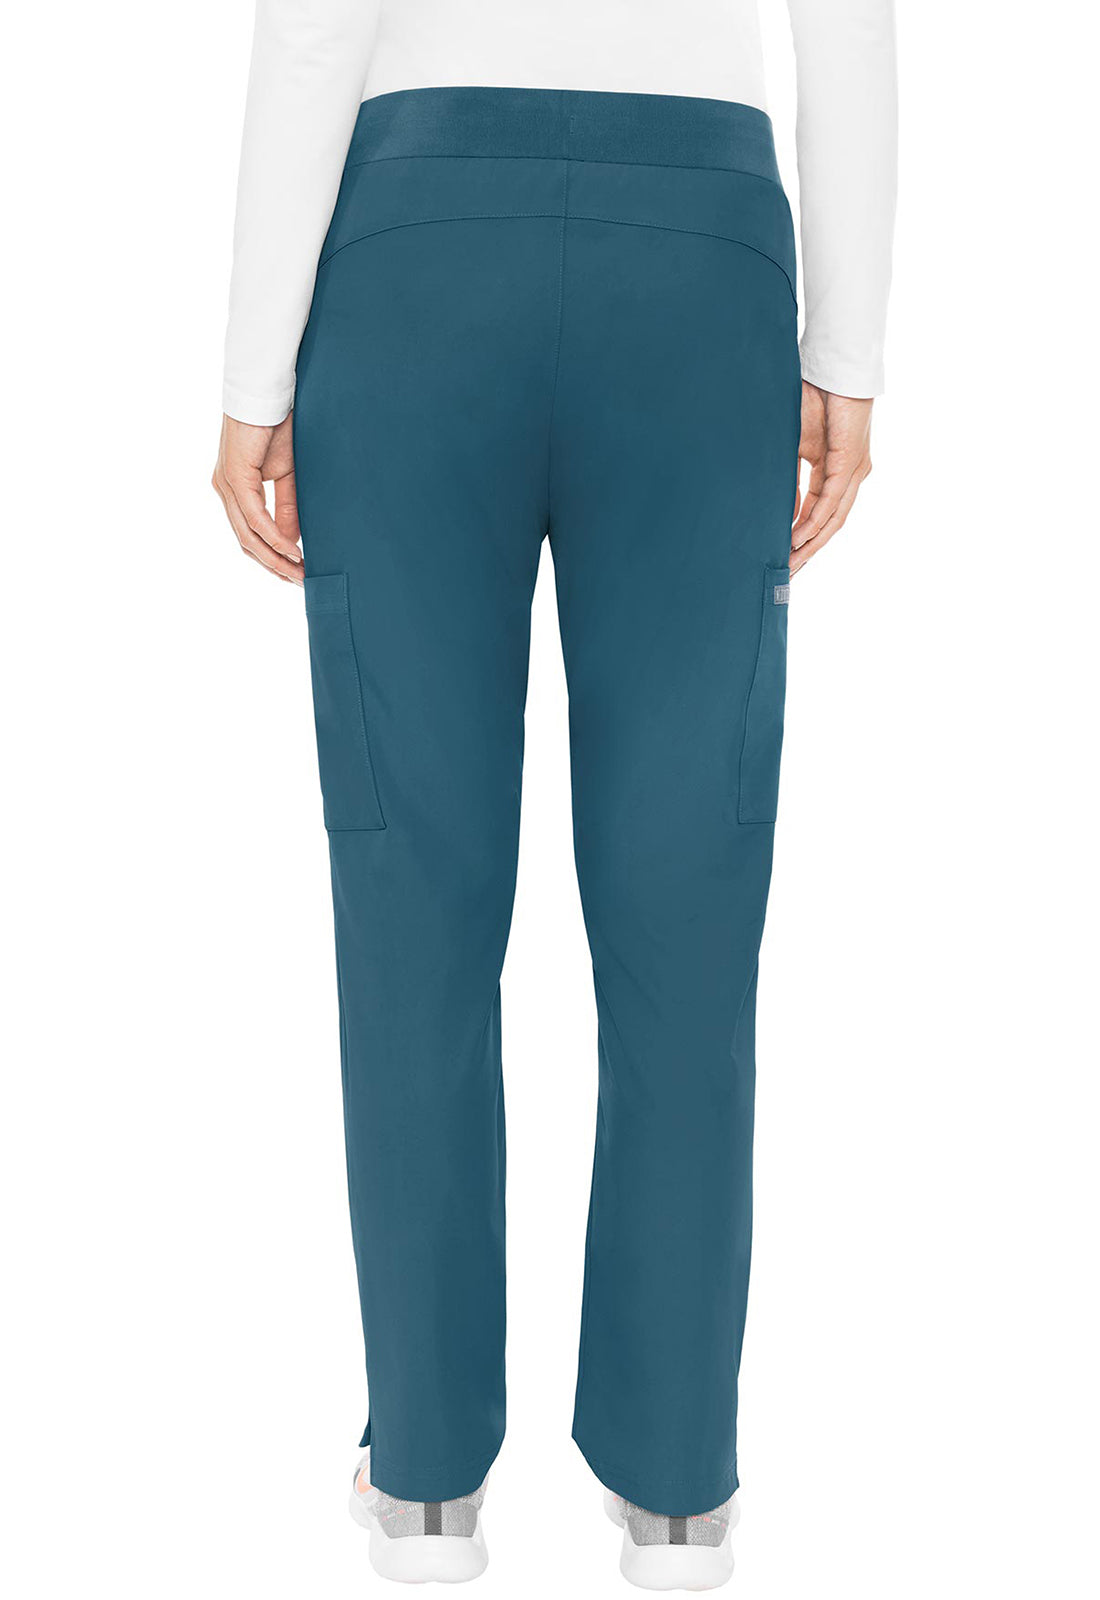 Clearance Med Couture Peaches Scoop Pocket Pants